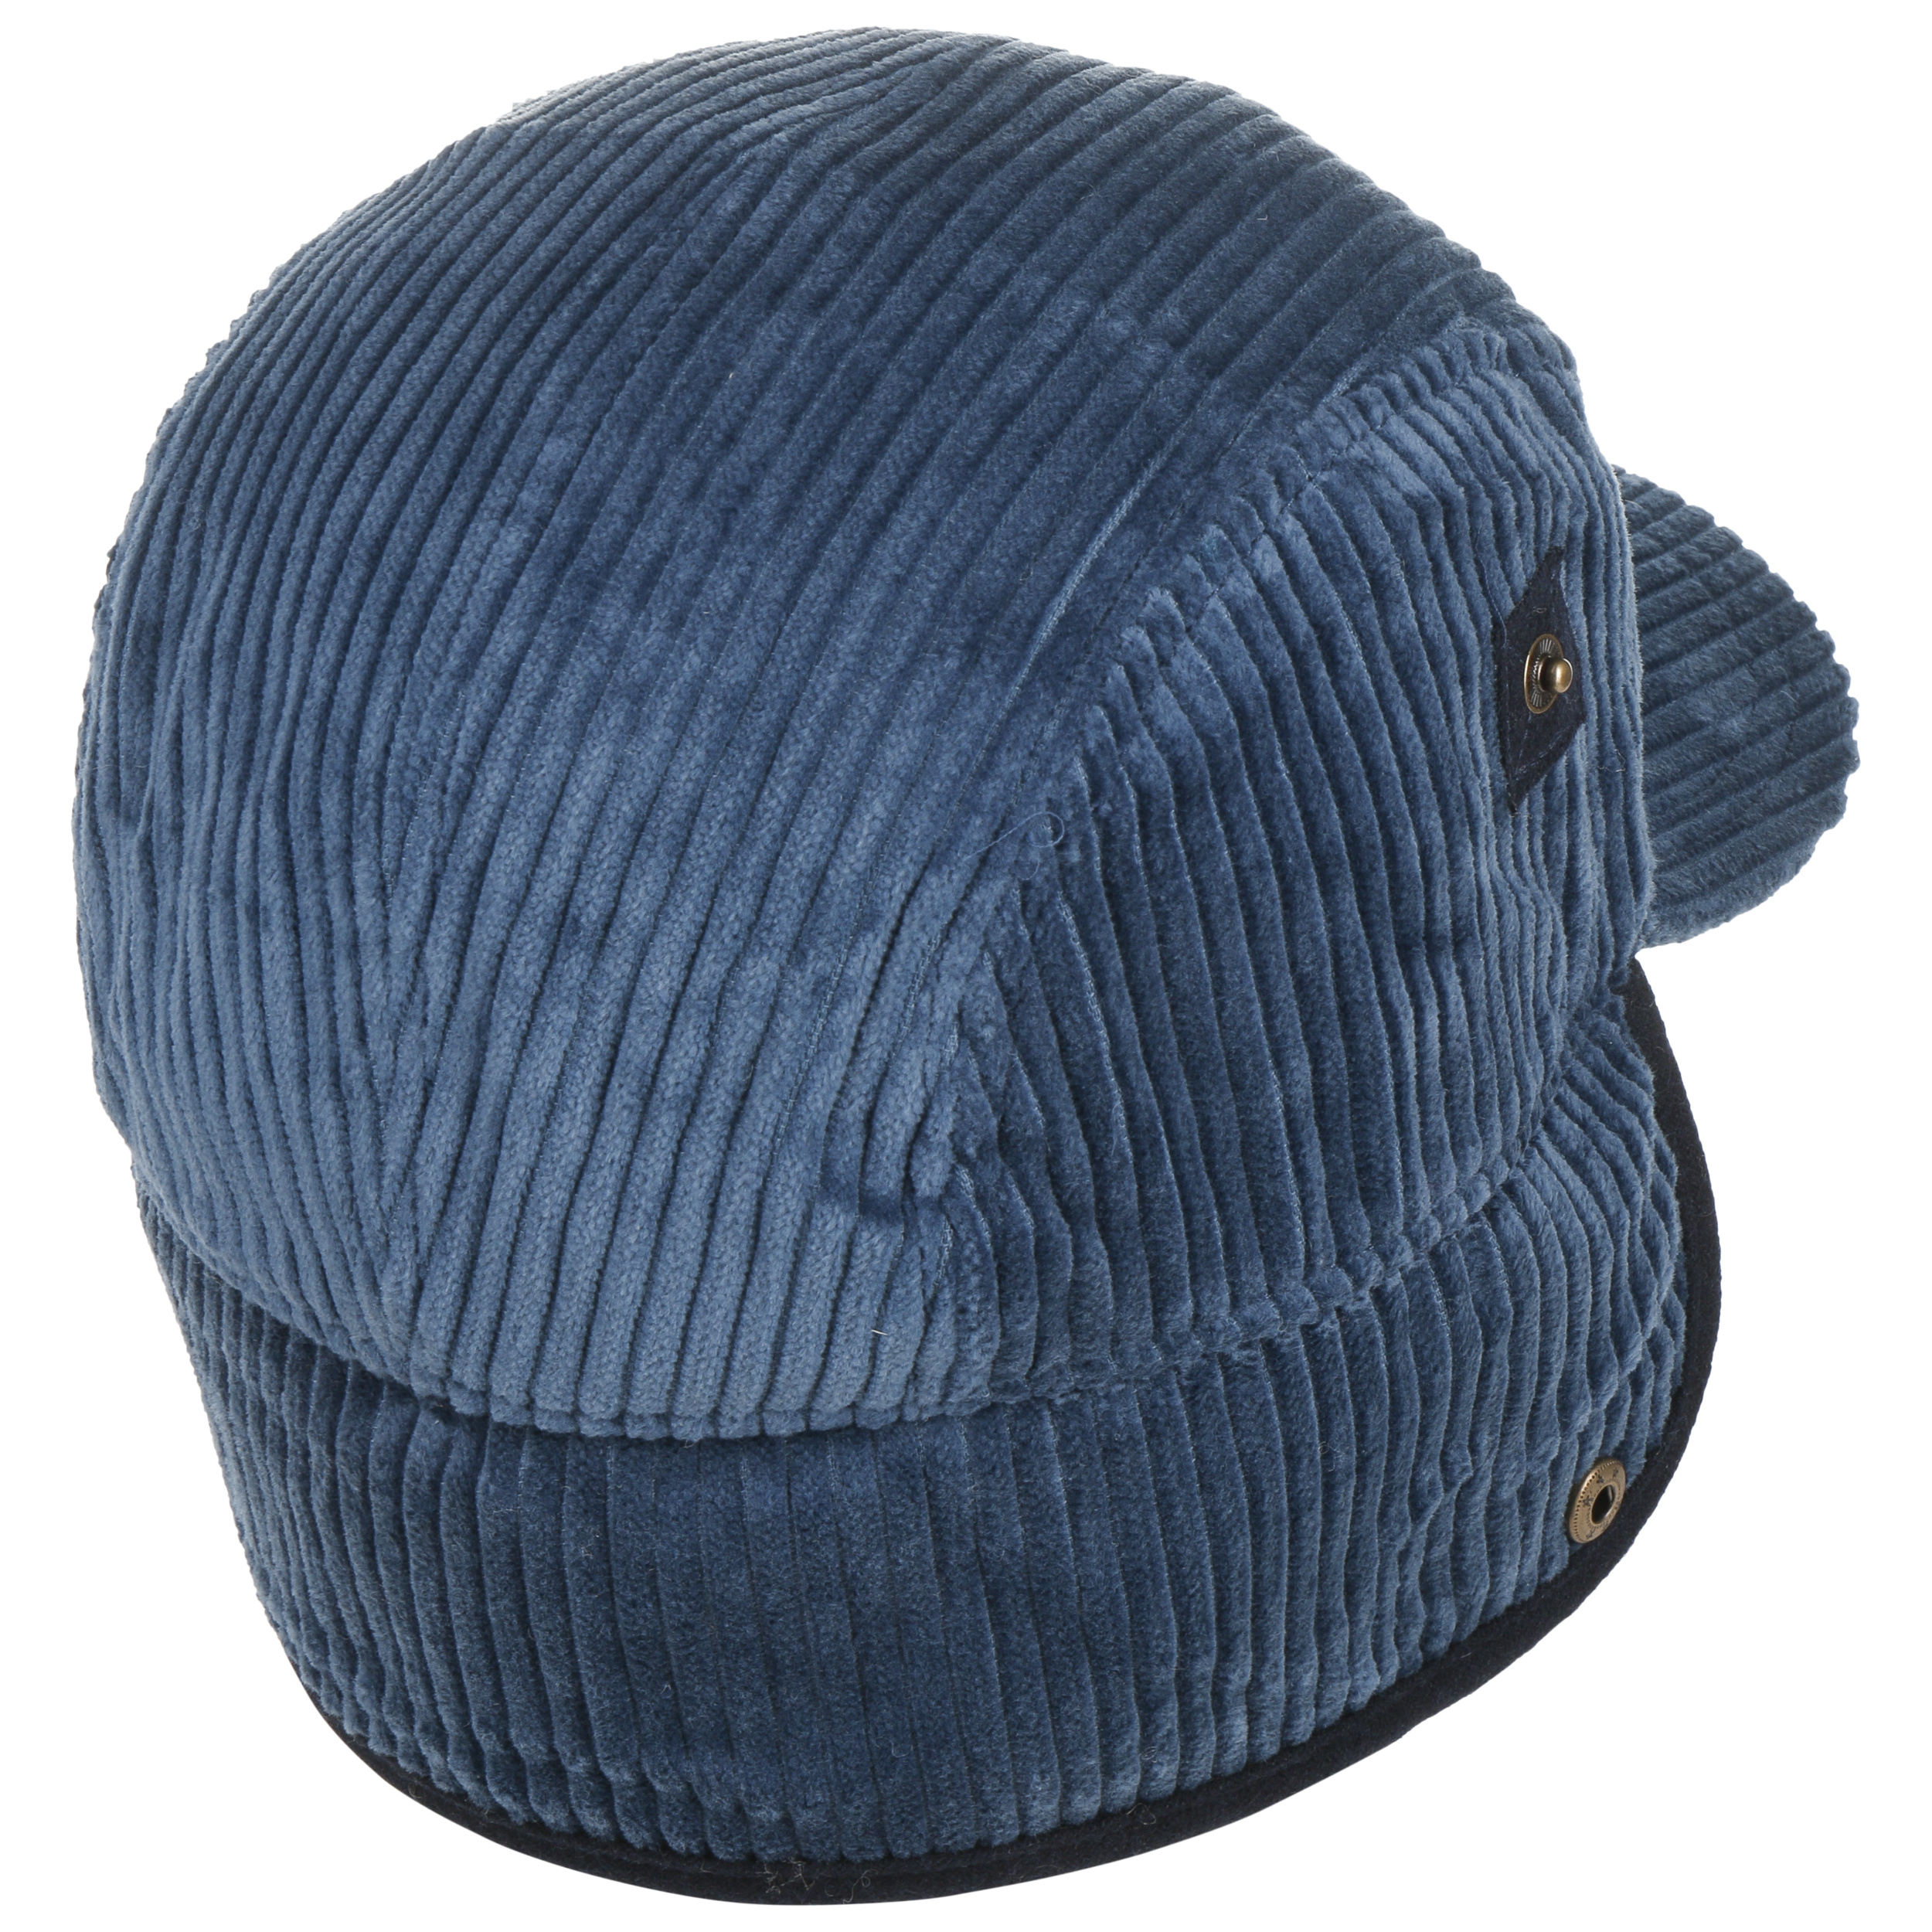 Rayner Cap with Ear 35,95 - Barts by £ Flaps